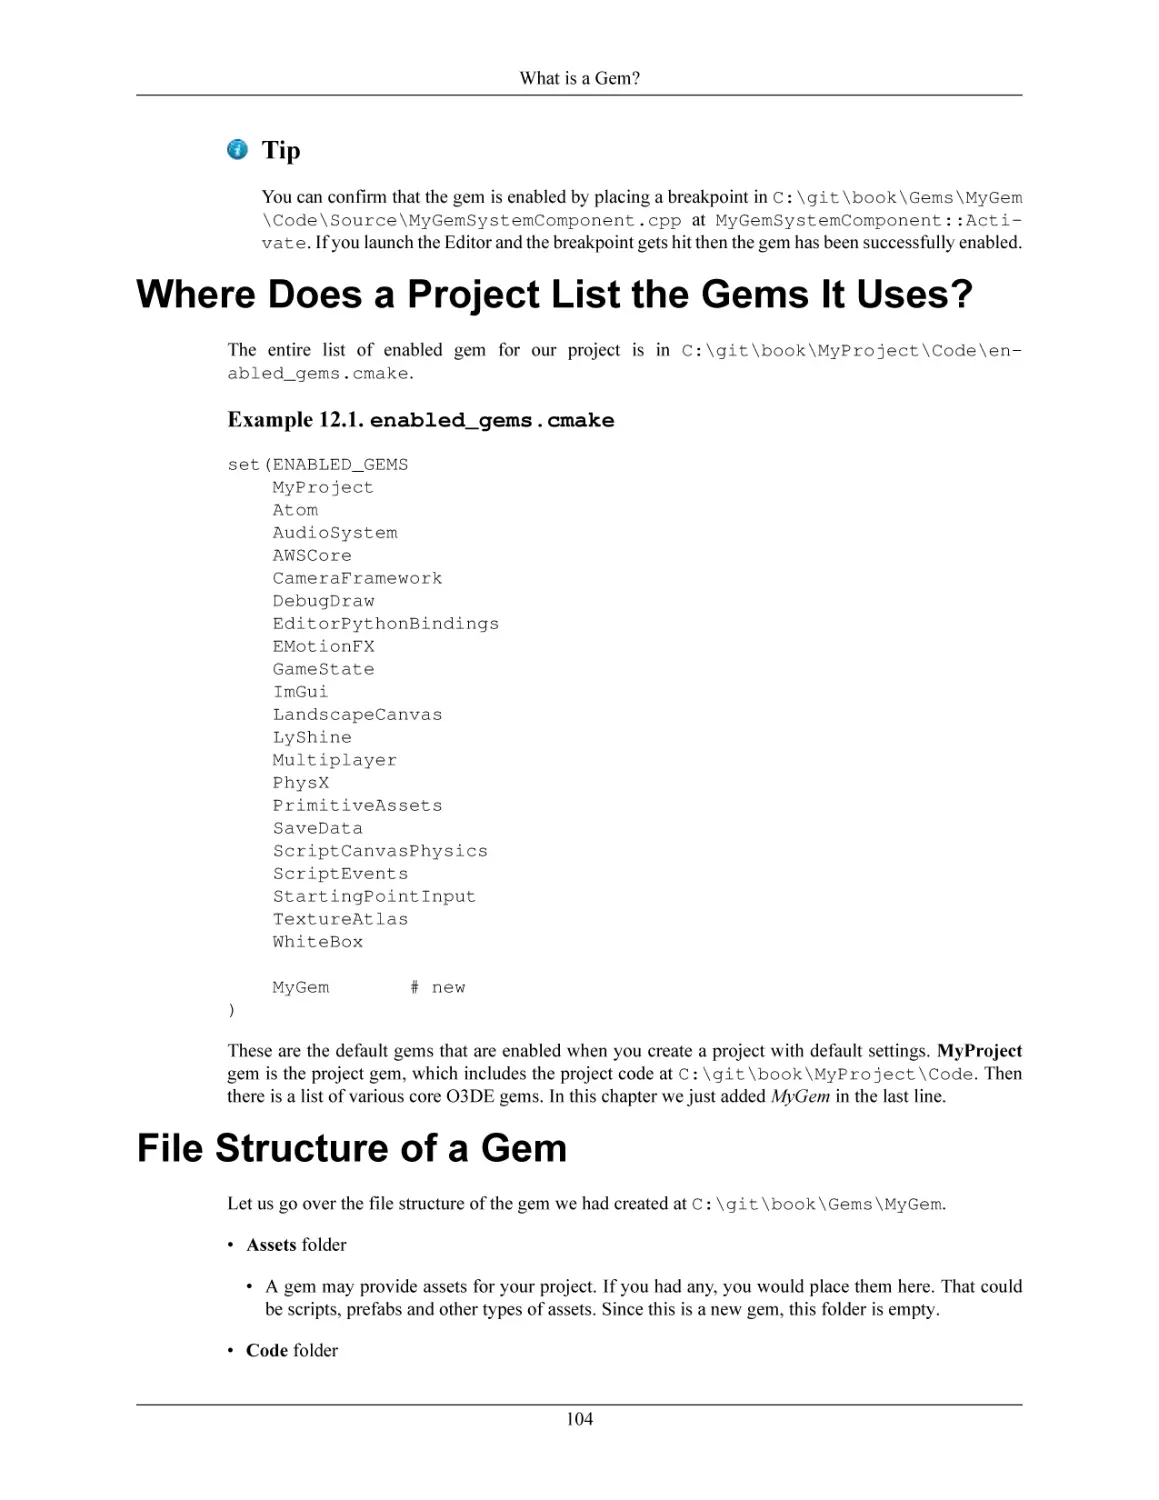 Where Does a Project List the Gems It Uses?
File Structure of a Gem